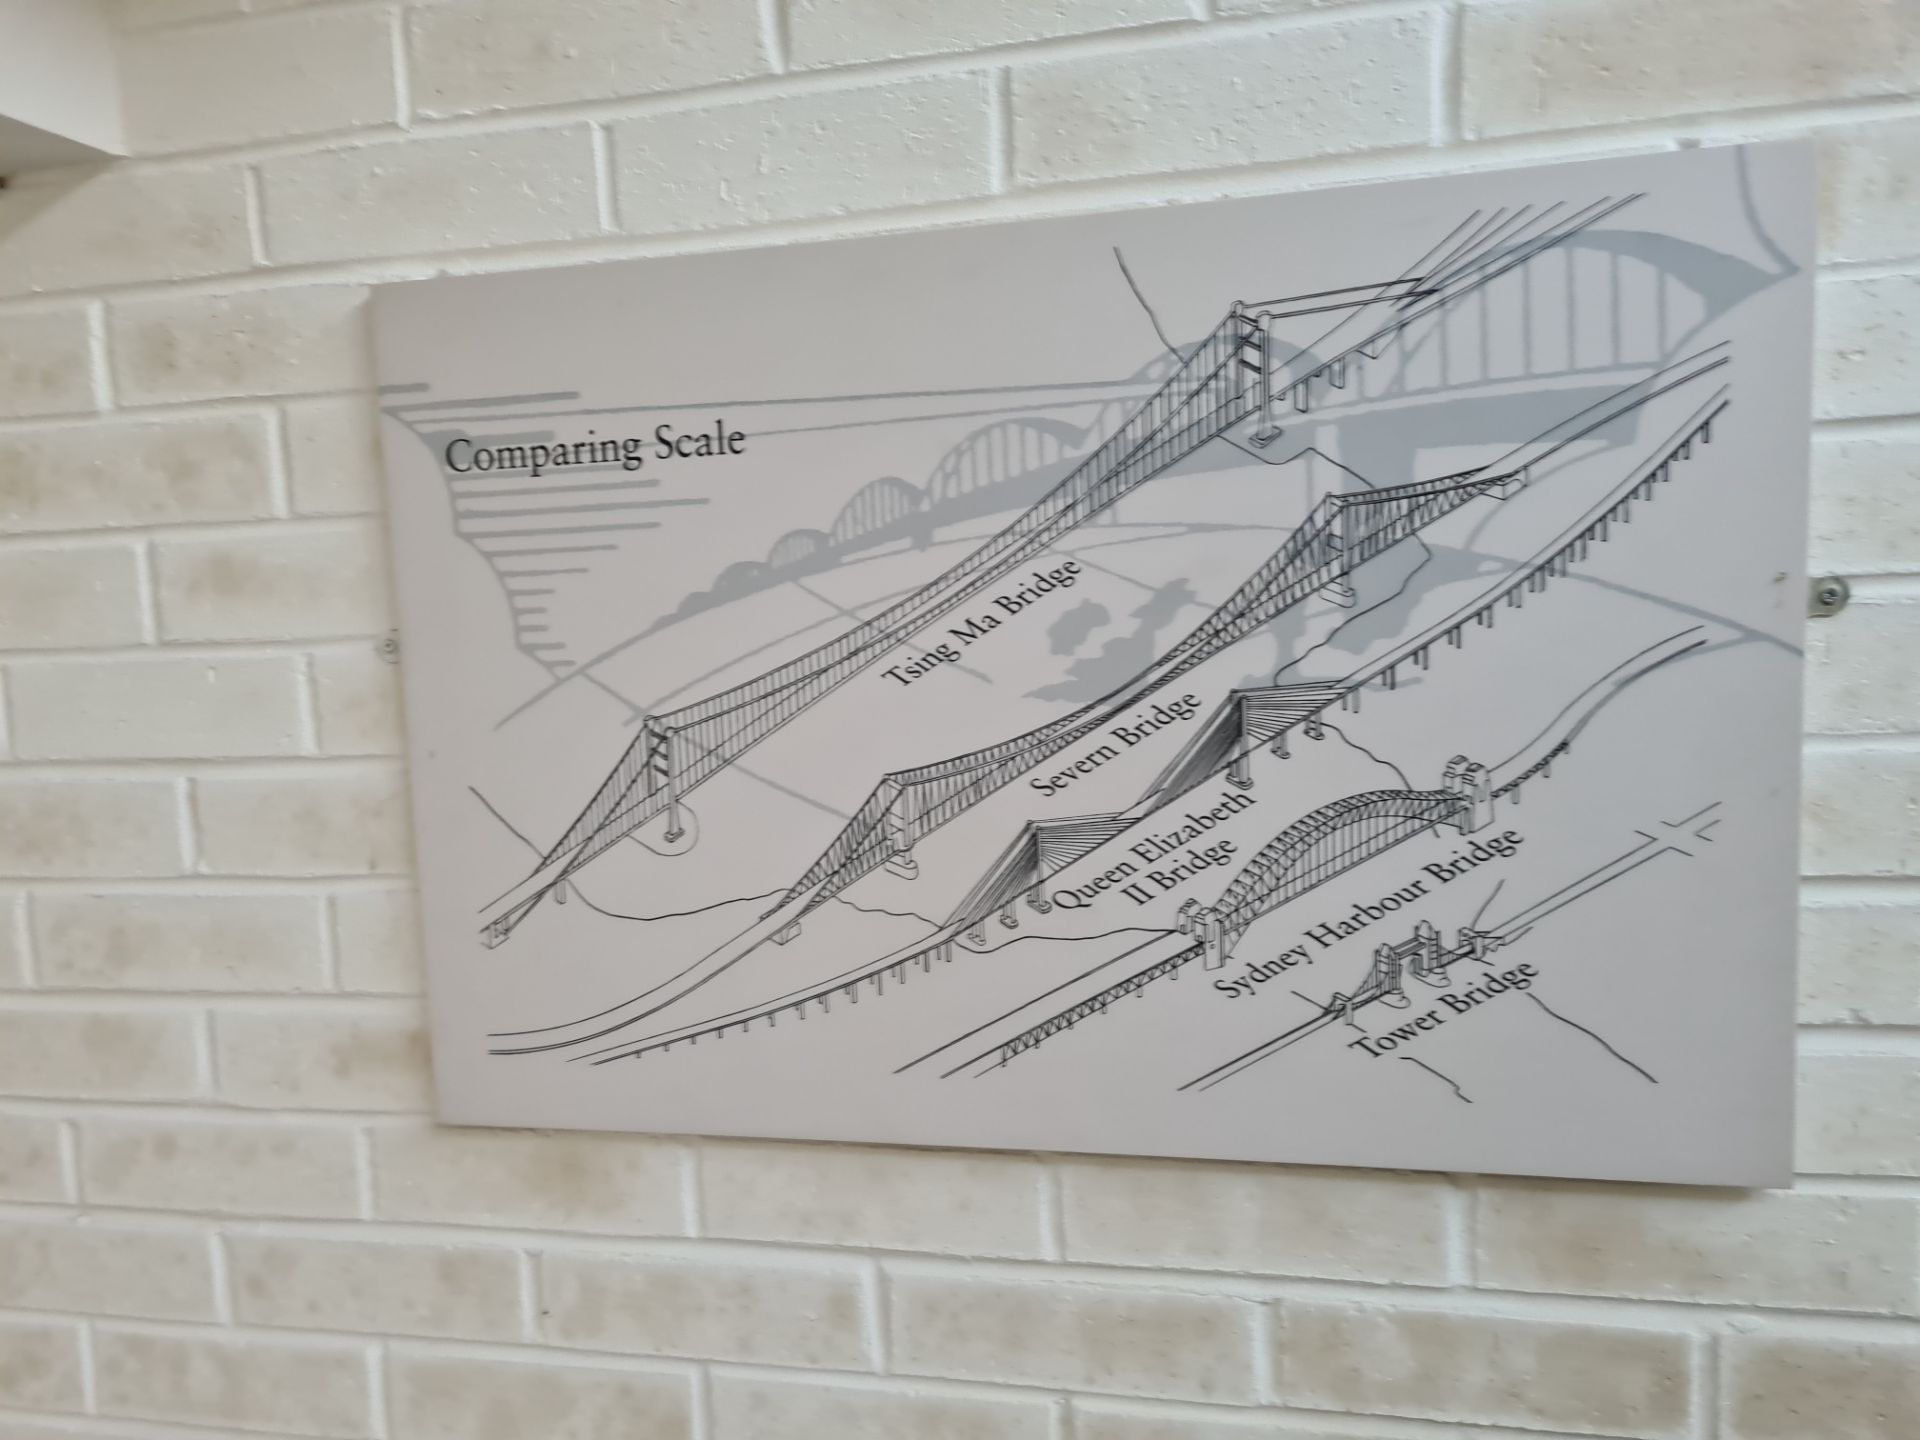 Seven Display Panels Showing a Pictural History of Bridge Building from DarlingtonPlease read the - Image 2 of 7